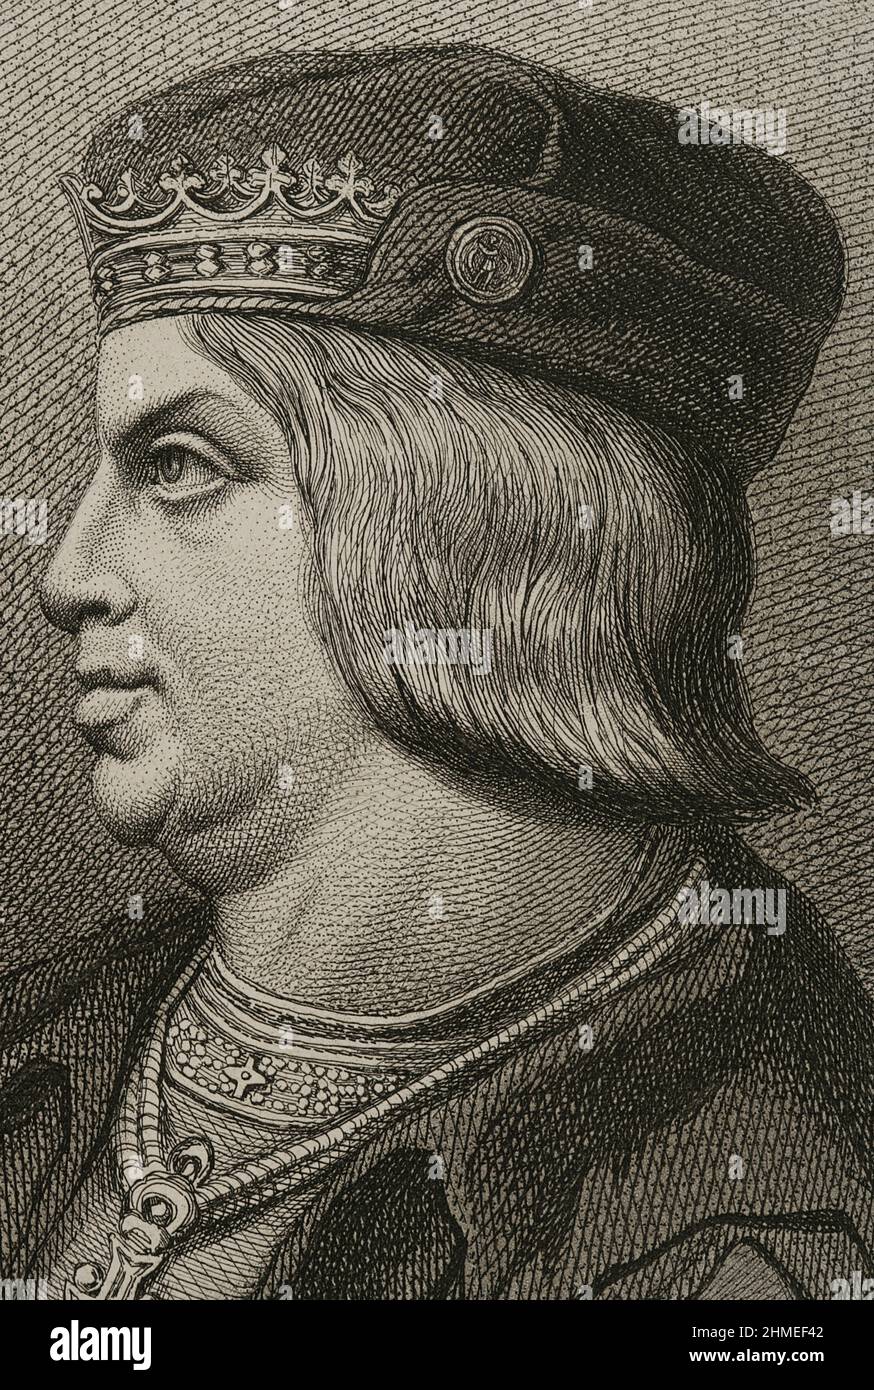 Ferdinand II of Aragon, called The Catholic (1452-1516). King of the Crown of Aragon. King of Castile as Ferdinand V (1474-1504). Portrait. Engraving by Masson. Lithographed by Magín Pujadas. Detail. 'Historia General de España', by Modesto Lafuente. Volume II. Published in Barcelona, 1879. Stock Photo